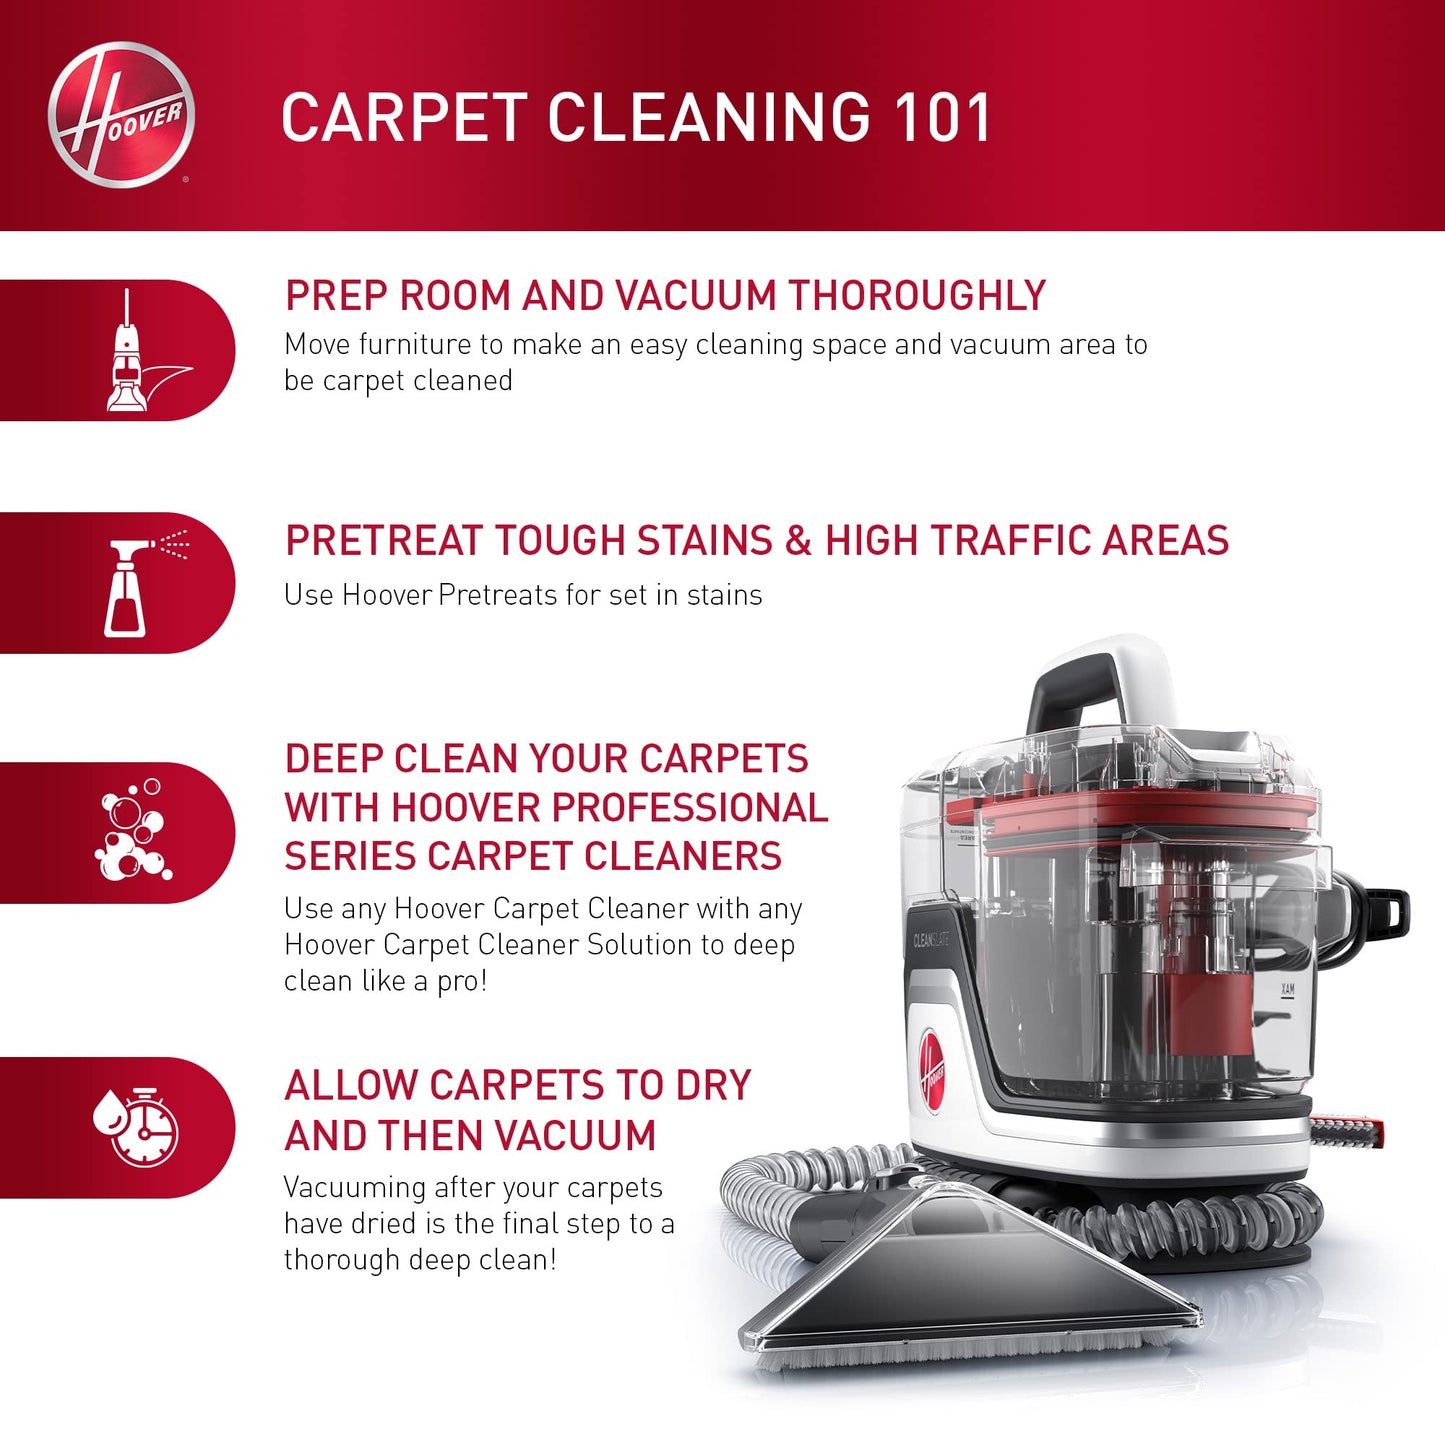 Hoover CleanSlate Plus Portable Carpet & Upholstery Spot Cleaner, Carpet Cleaner Machine, Pet Stain Remover, Car and Auto Detailer, Powerful Suction with Versatile Tools, FH14050, White - Like New